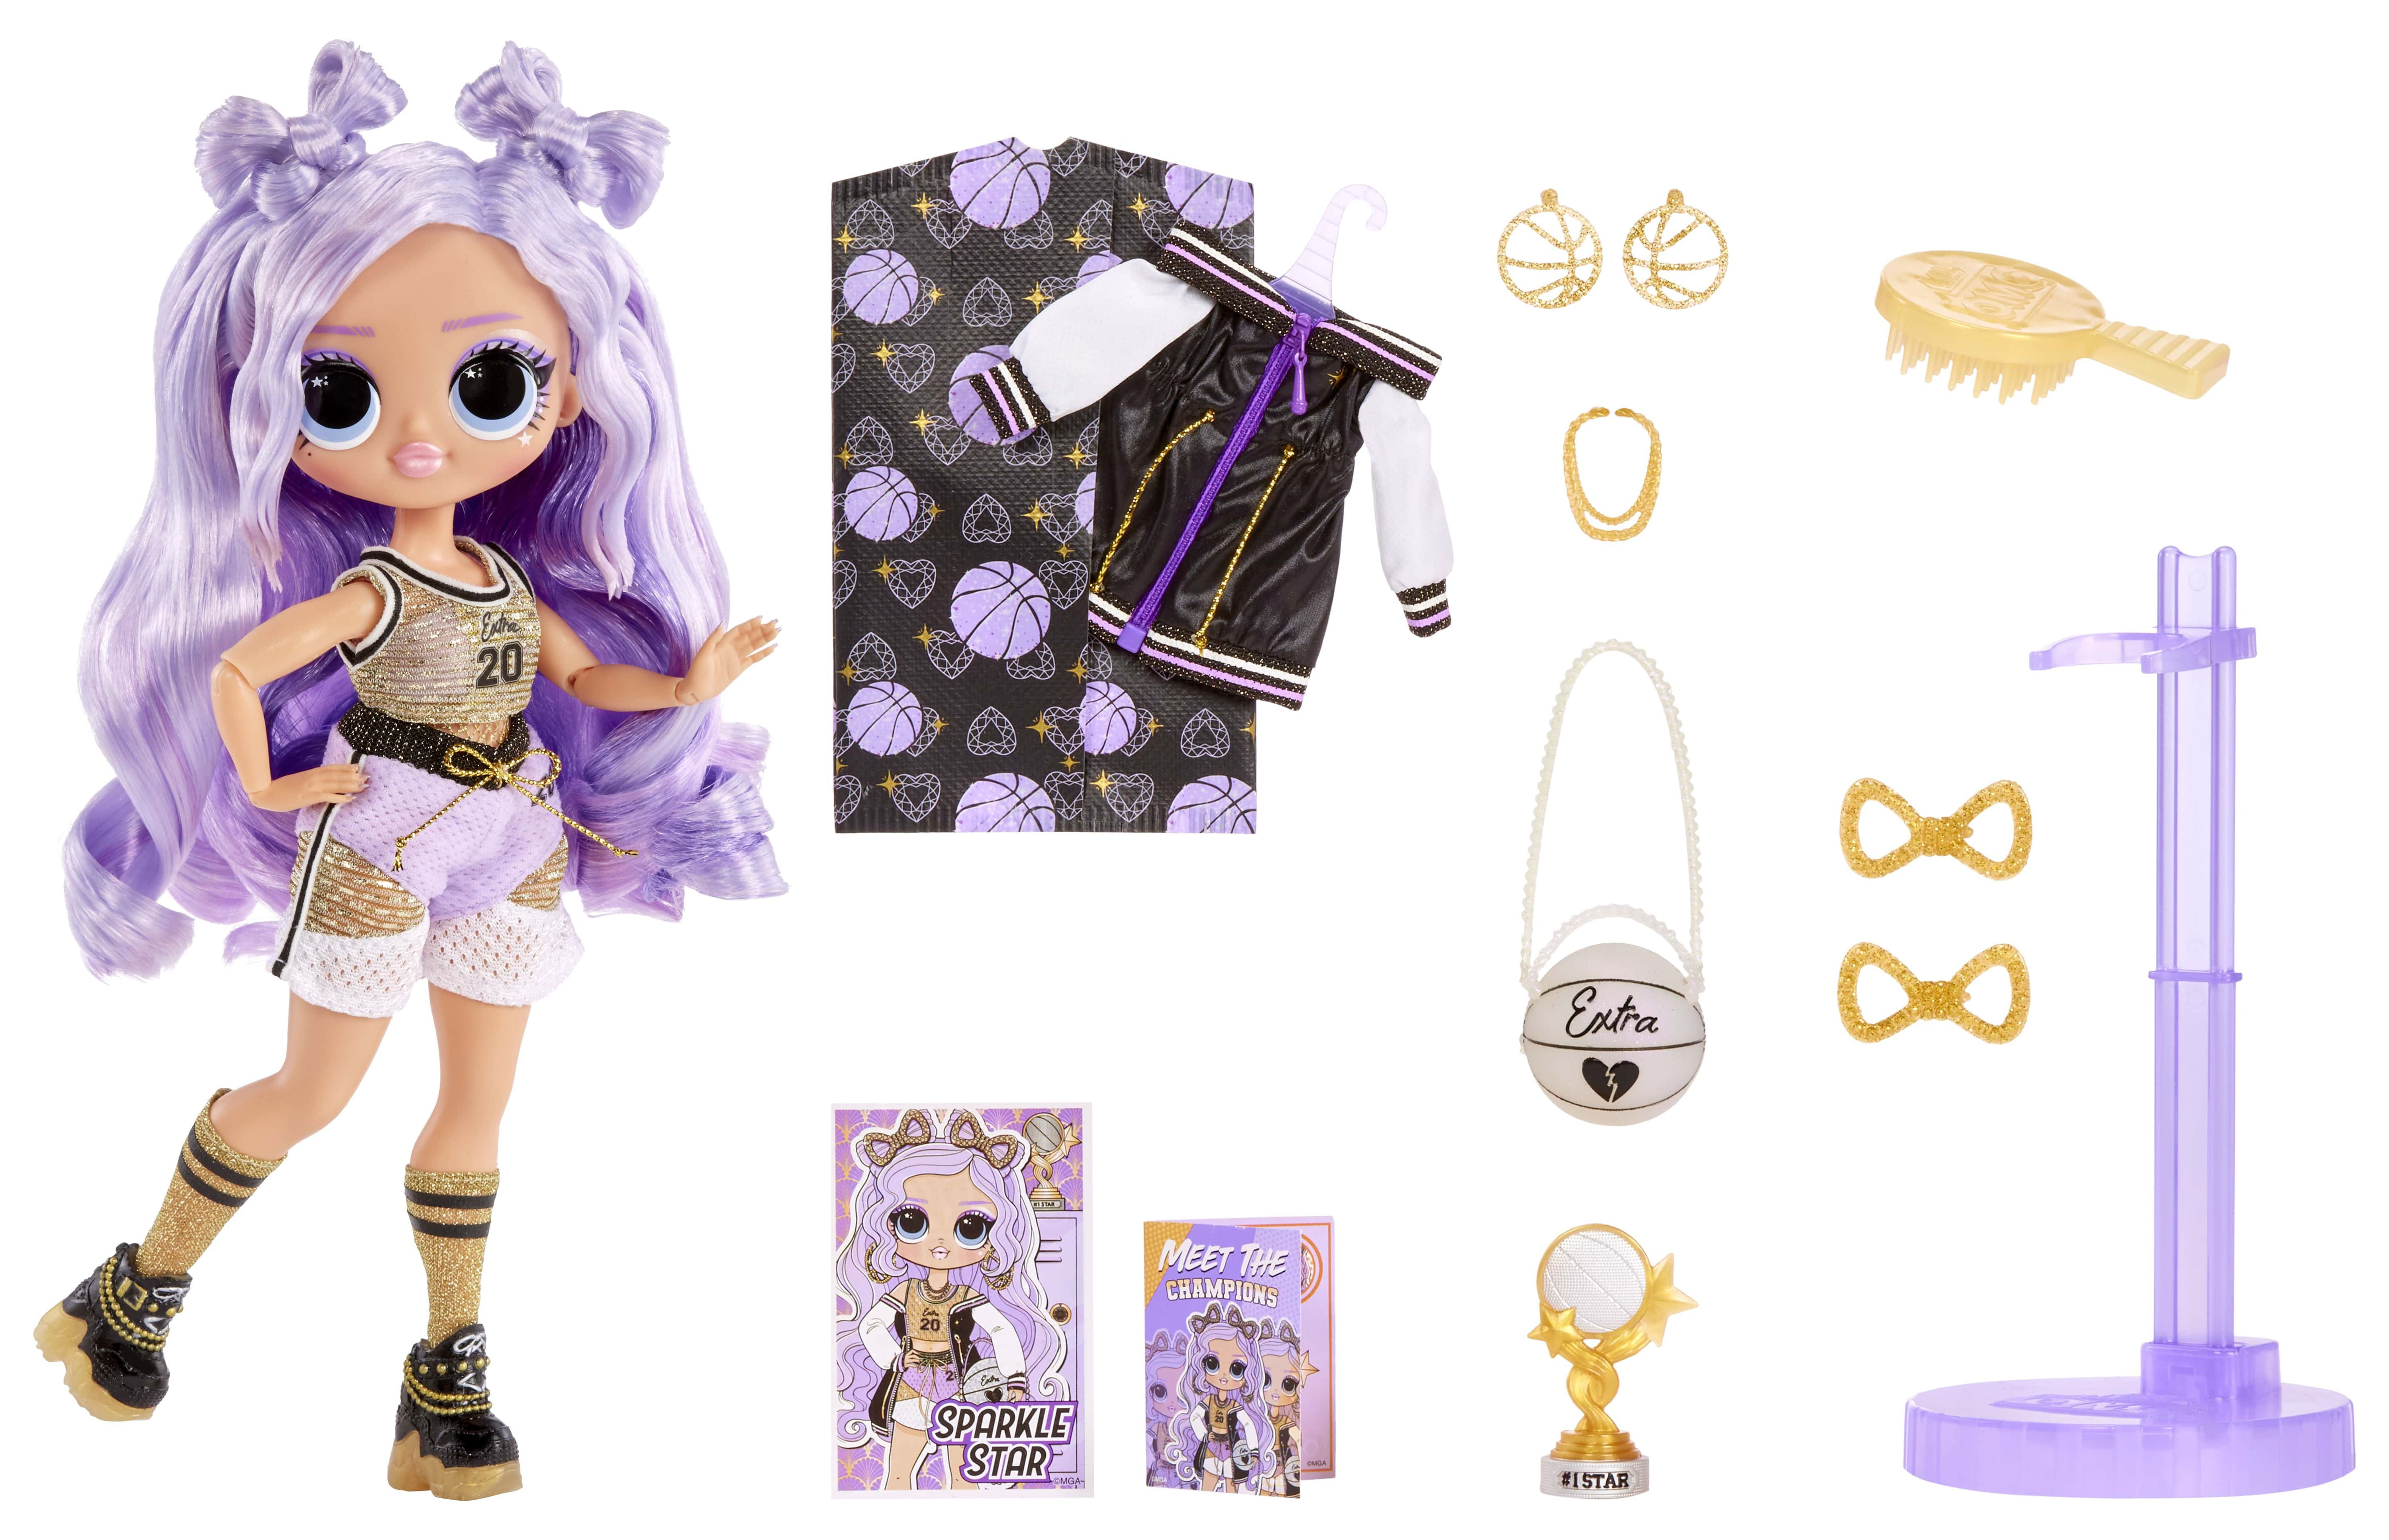 LOL Surprise OMG Sweets Fashion Doll - Dress Up Doll Set With 20 Surprises  for Girls and Kids 4+